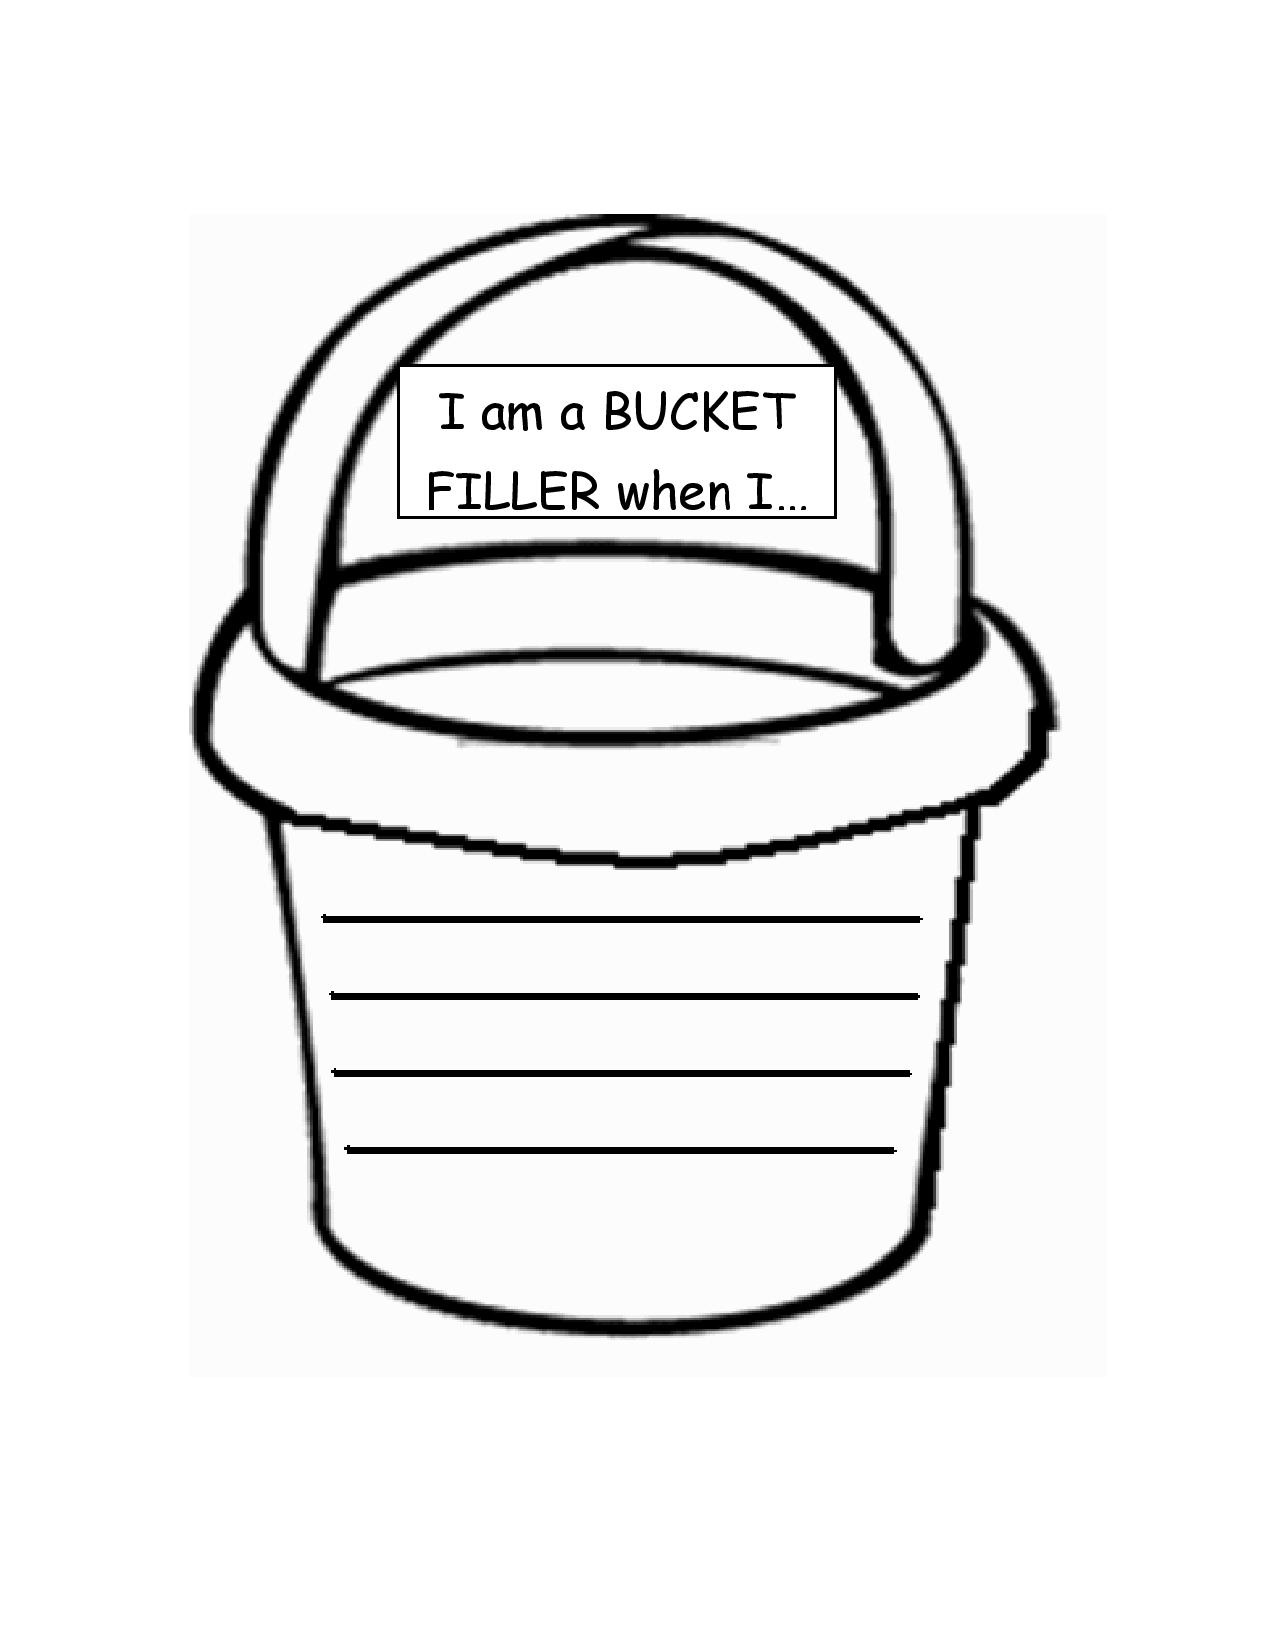 The Children Wrote Beautiful Descriptions Of When They Are Bucket    